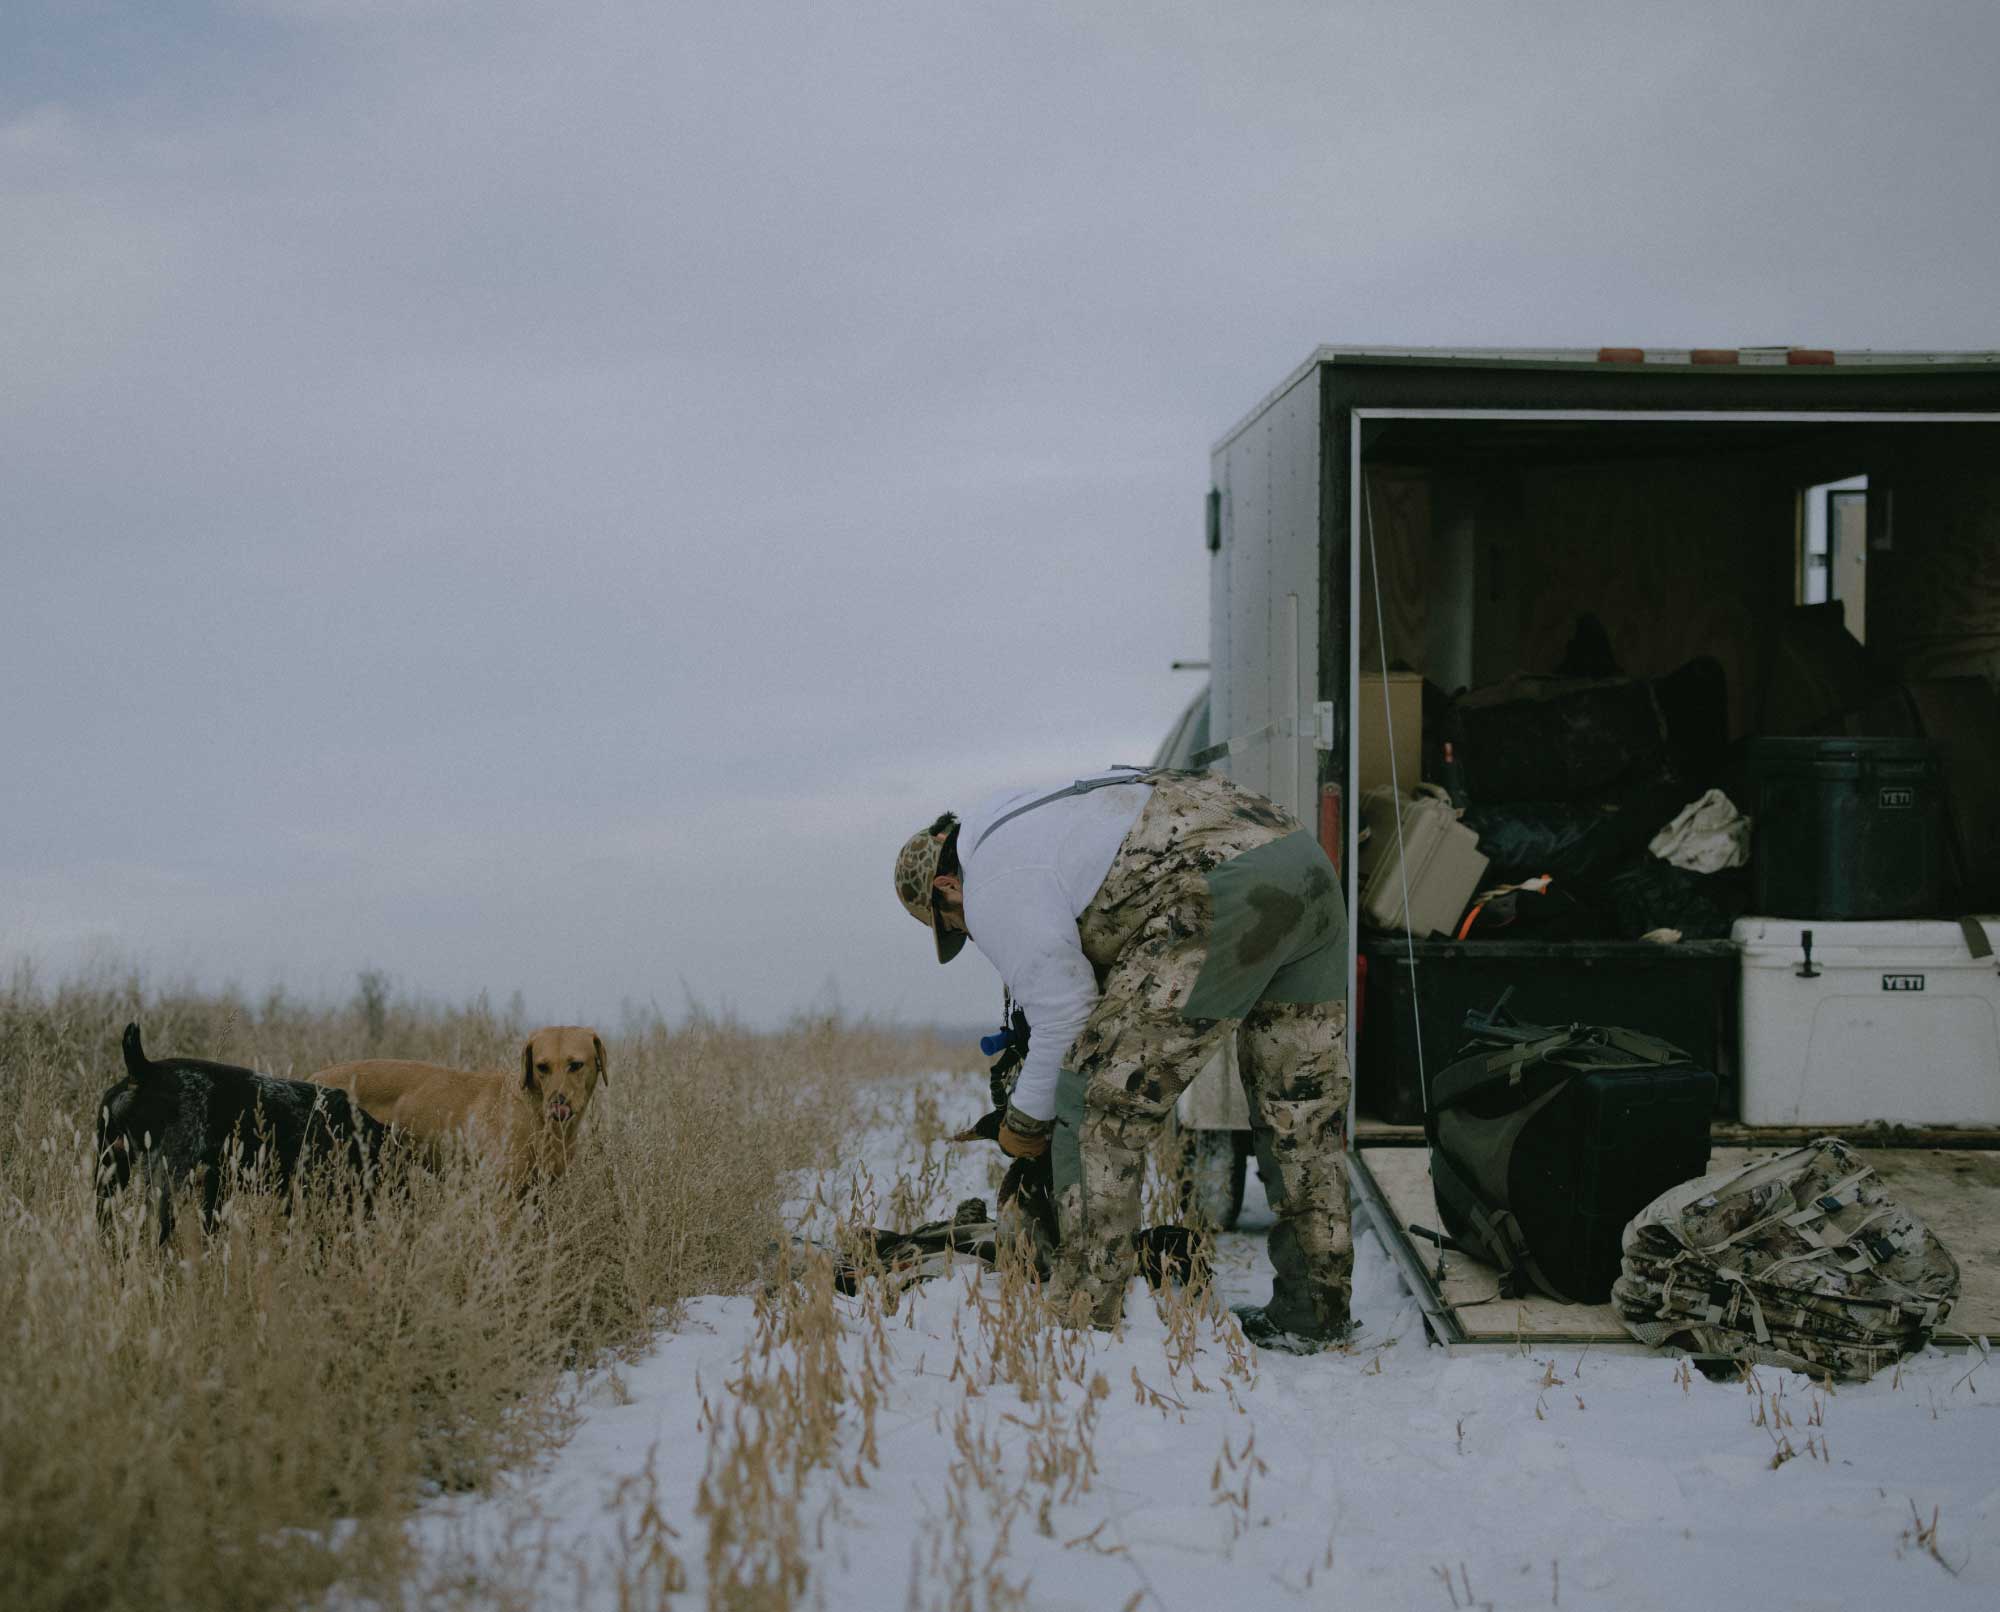 A truck bed with hunting gear and a yellow lab in a kennel